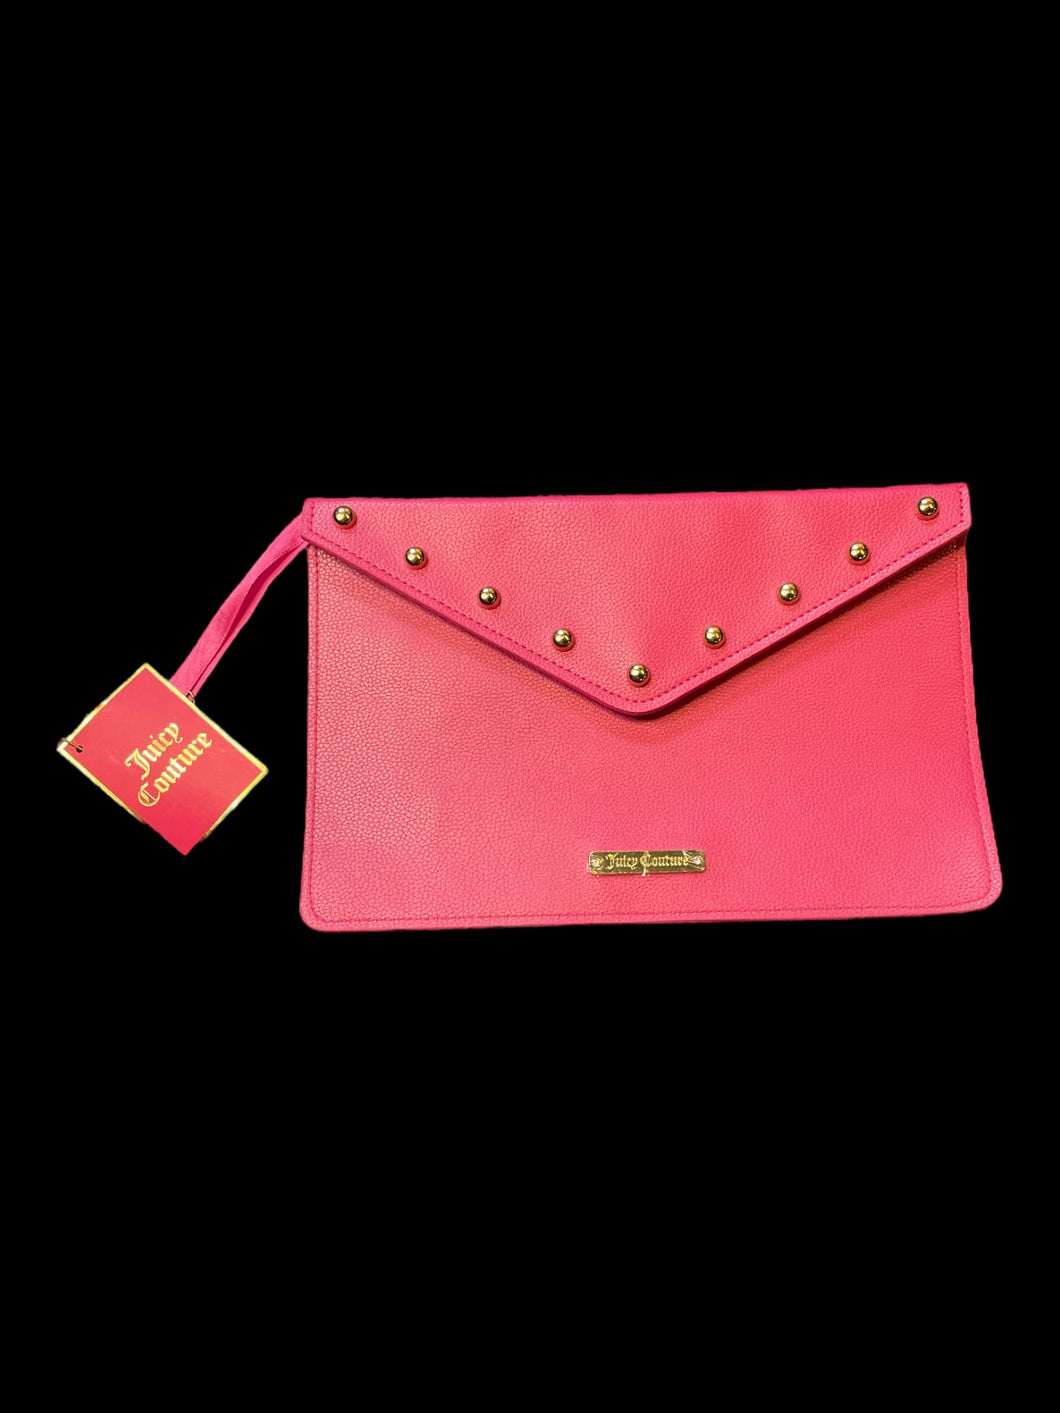 NWT Hot pink letter clutch w/ gold-like hardware & Juicy Couture logo, ribbon strap, & magnetic clasp